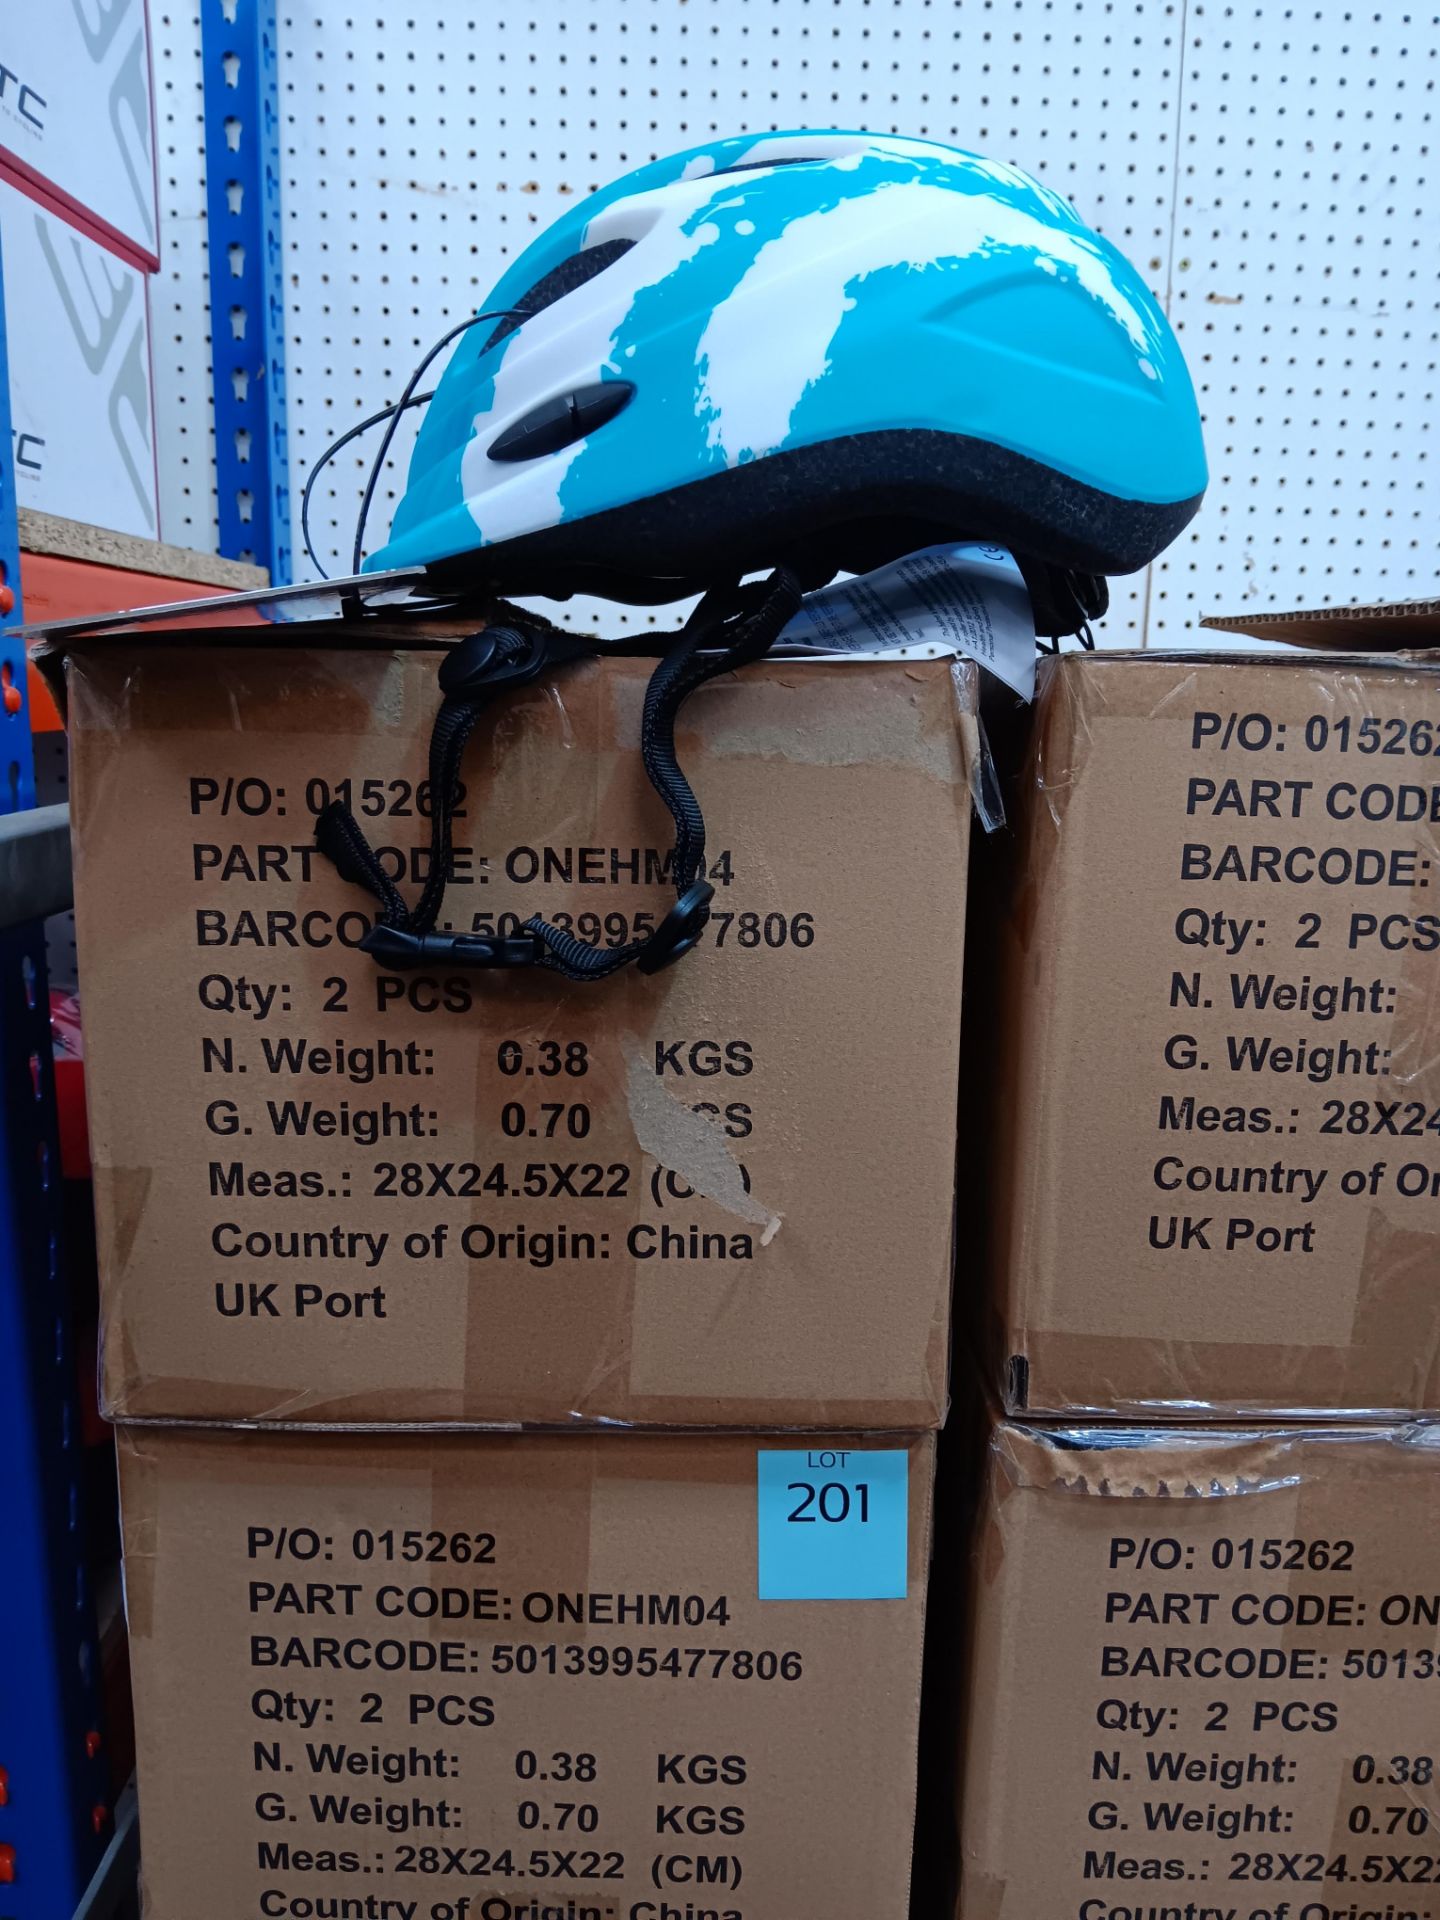 50 x One23 Y-42XS Child Cycle Helmet, Inmold Green (Size 46-52) (Trolley cage not included) - Image 3 of 3